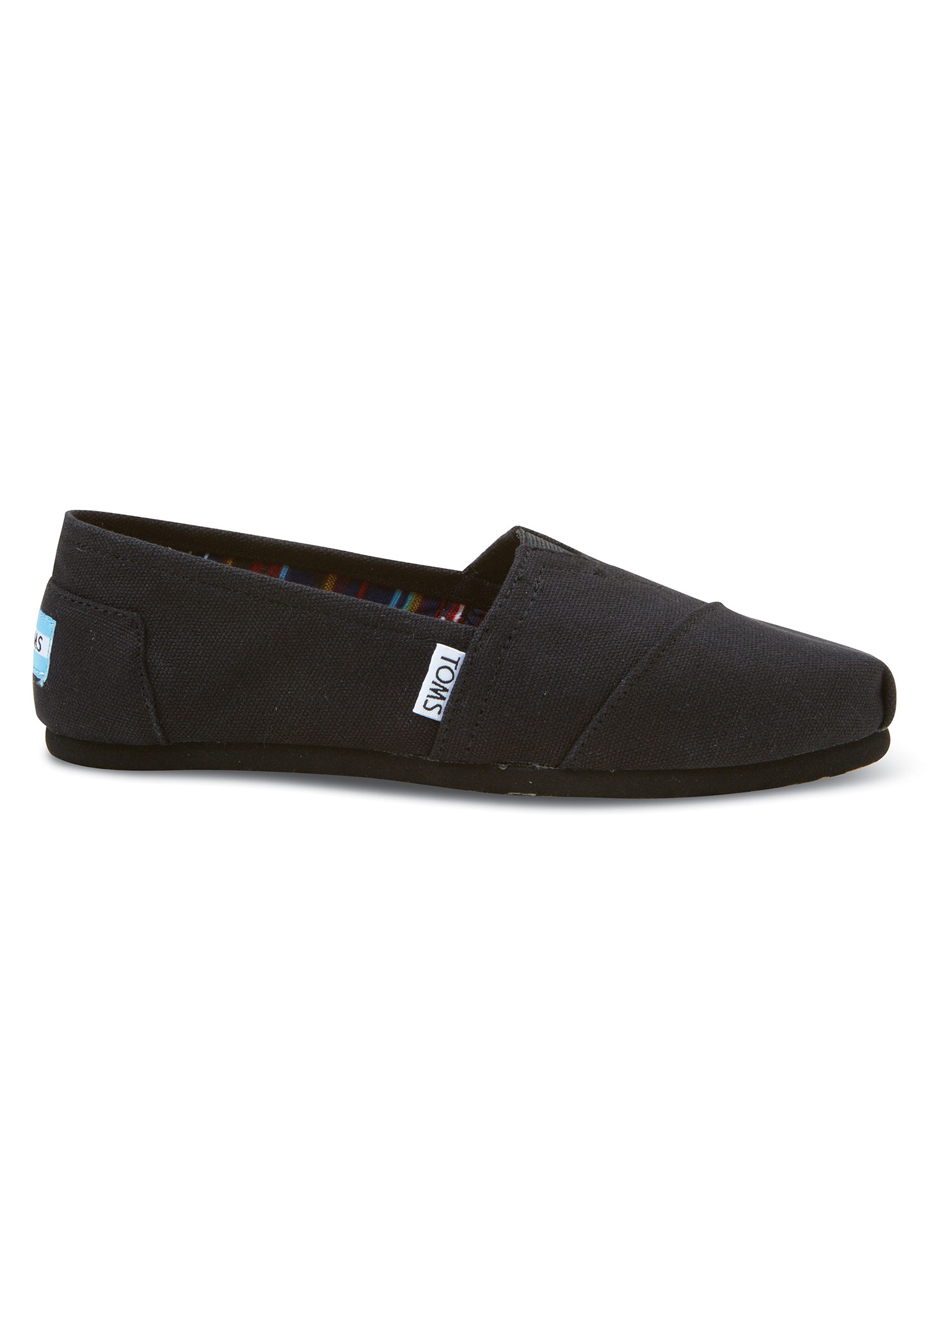 toms shoes all black